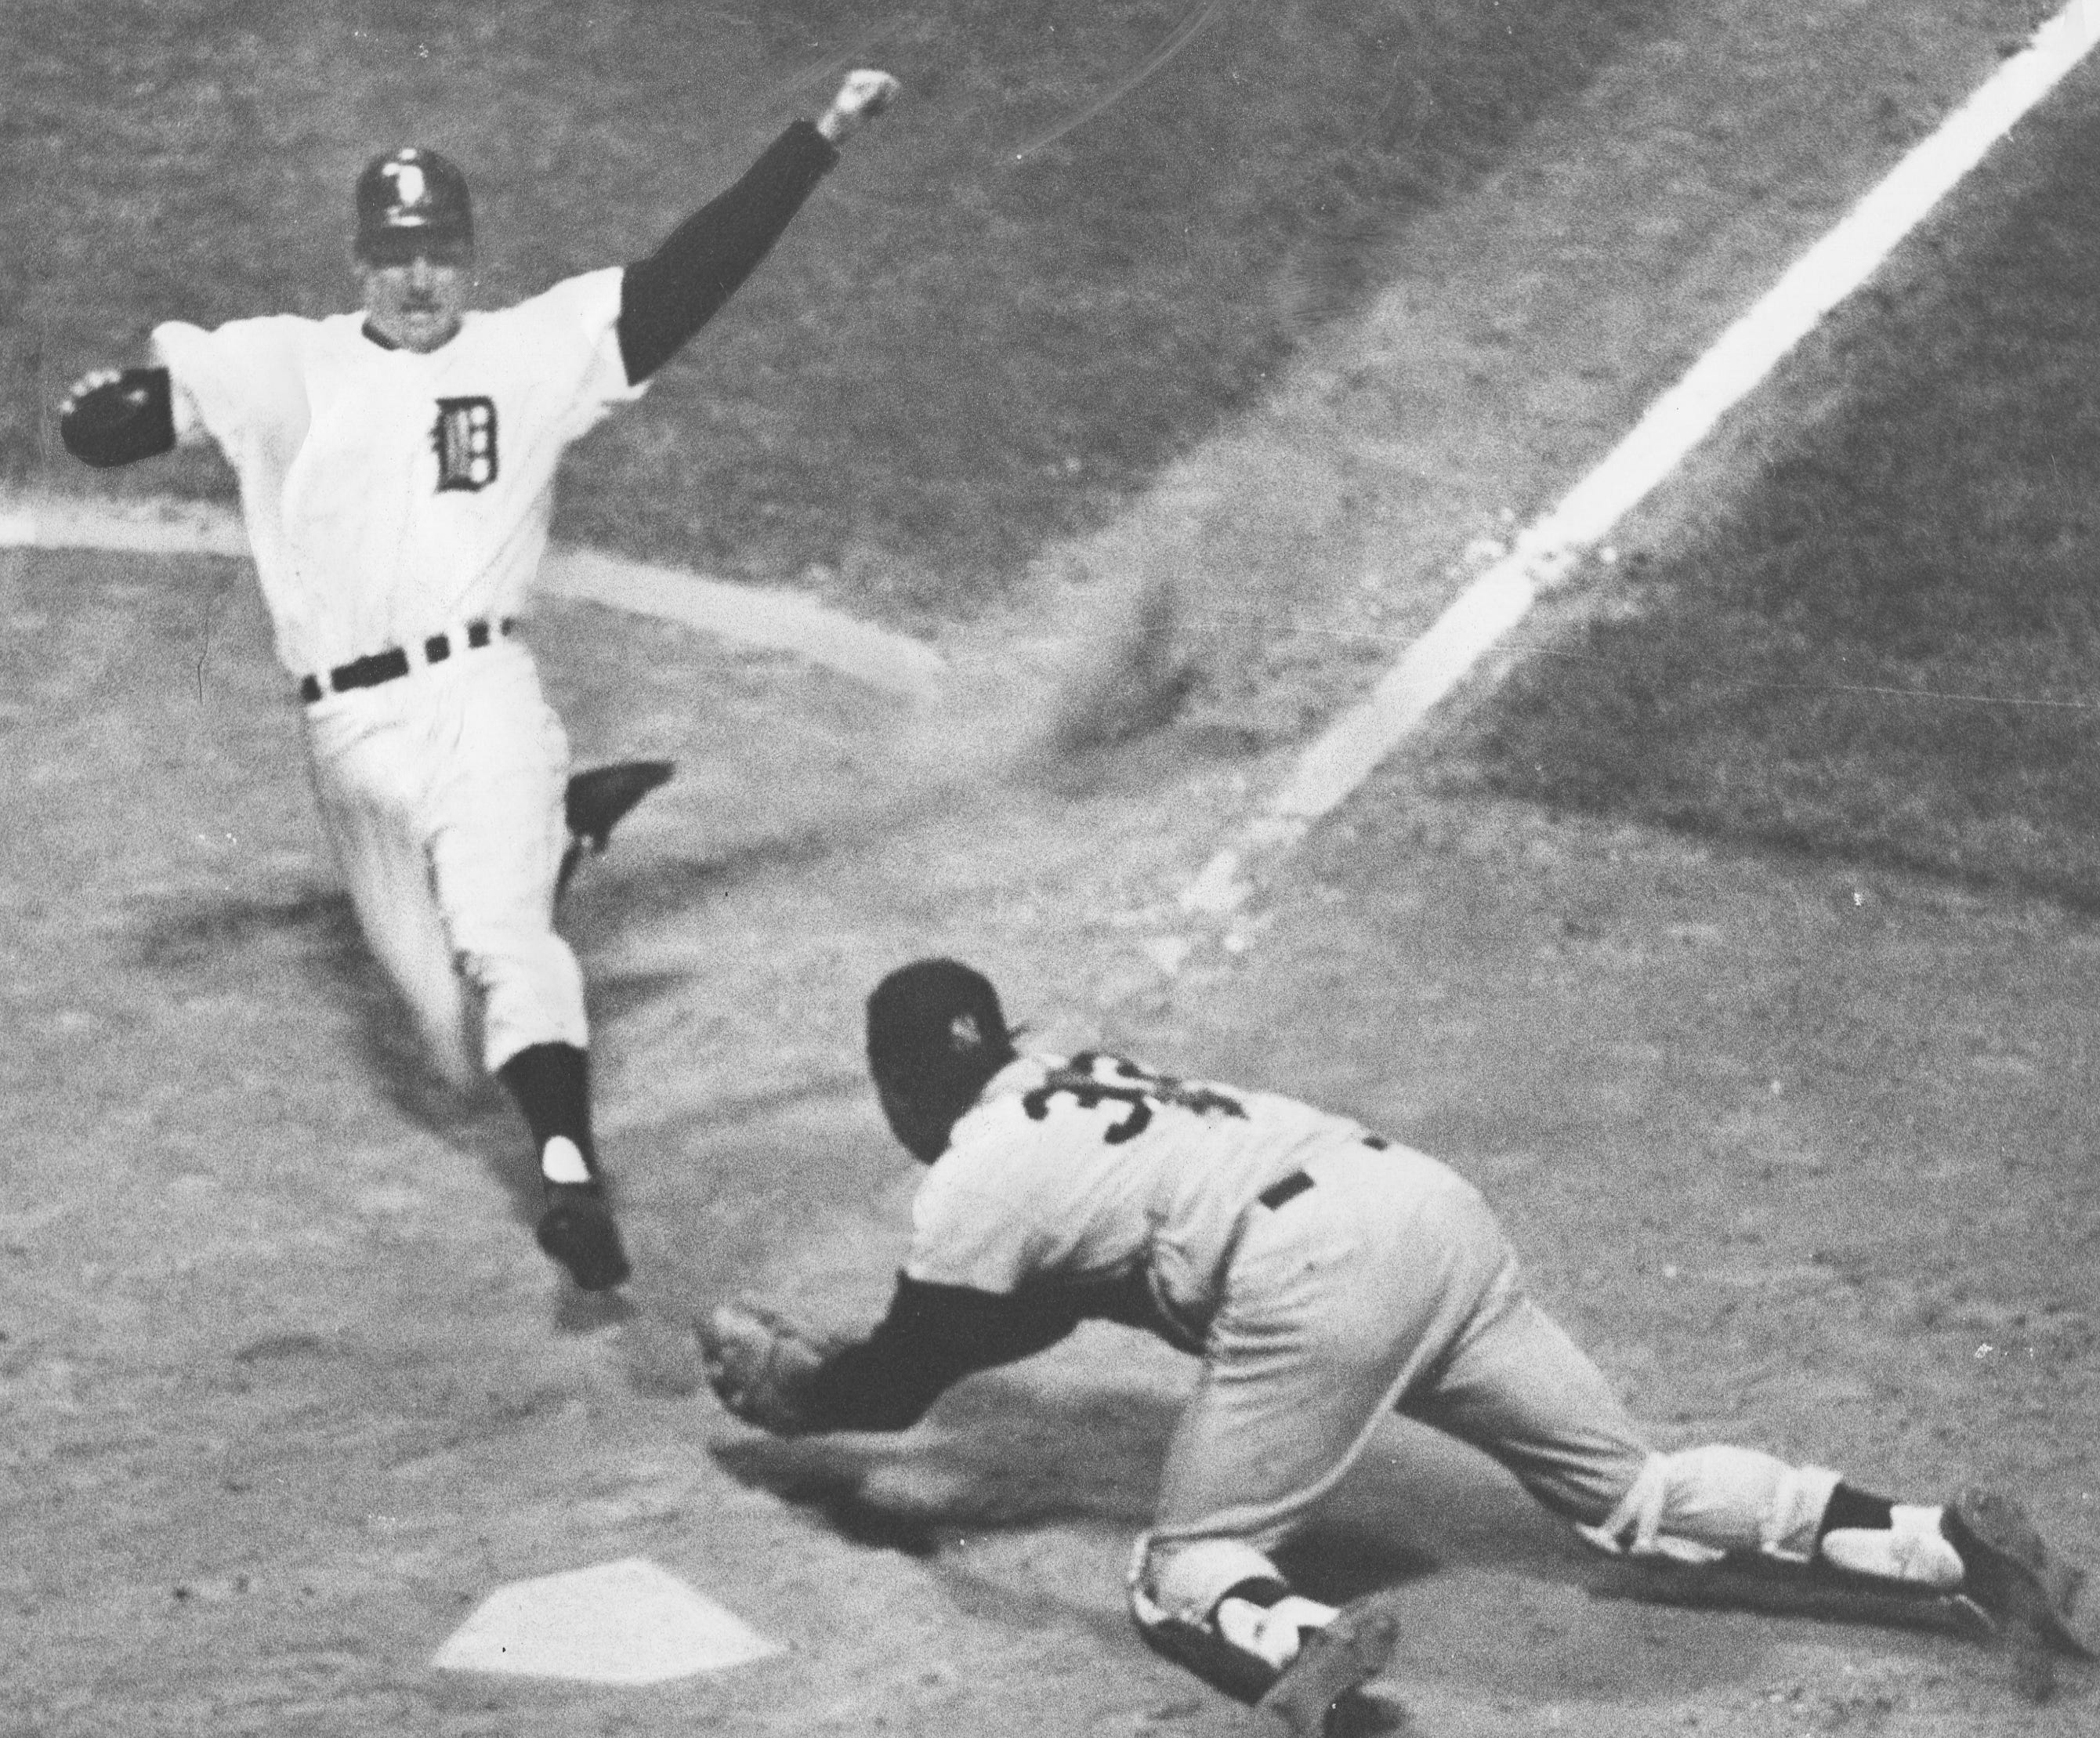 Detroit Tigers' Al Kaline slides into home plate during a game in 1966.